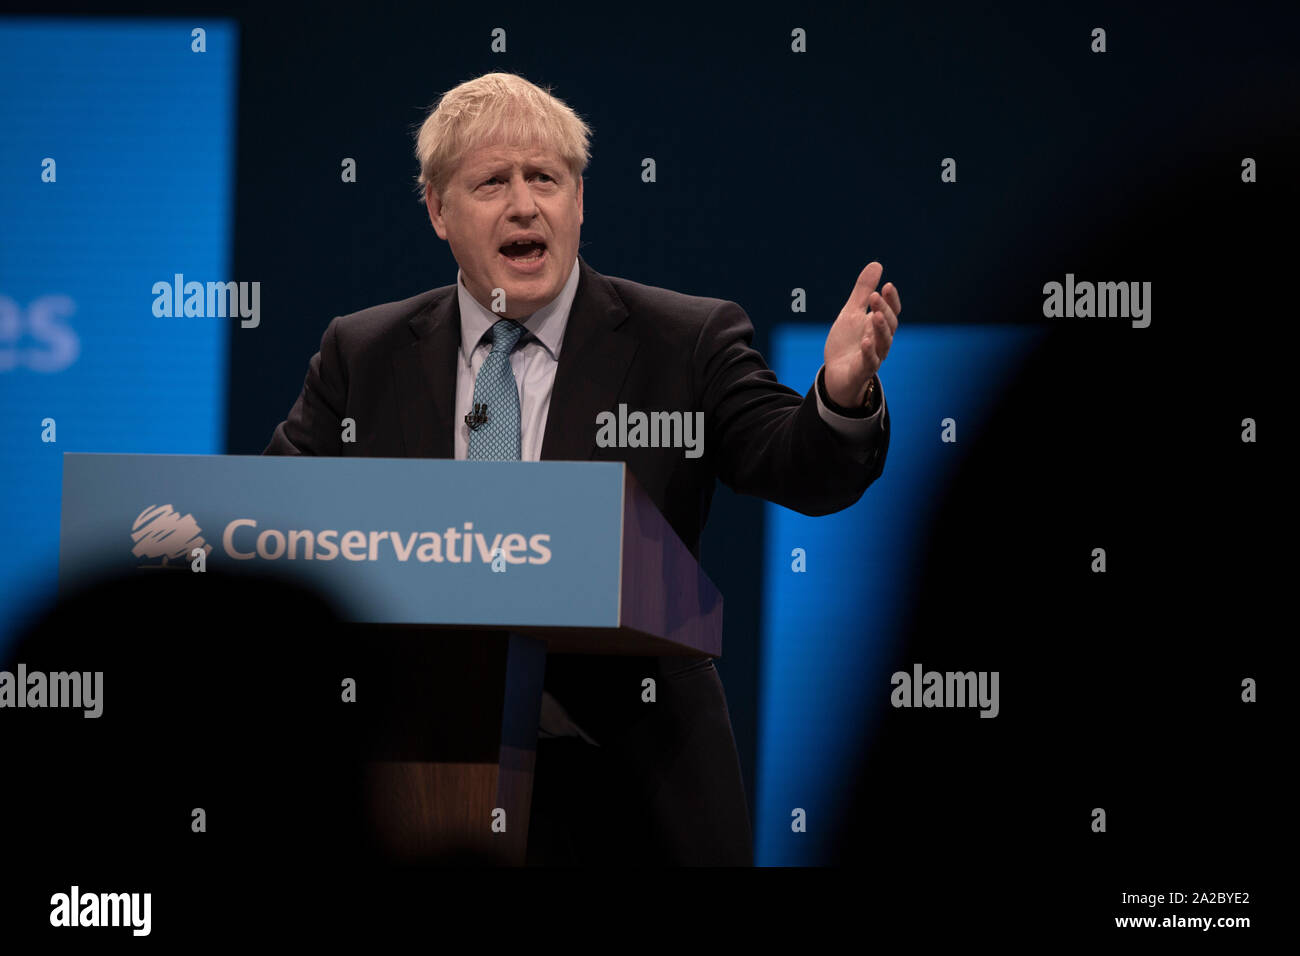 The Rt. Hon. Boris Johnson MP, leader of the Conservative Party and Prime Minister of the United Kingdom, delivering his keynote speech to the annual party conference in Manchester. The speech focused on a core message of delivering Brexit and honouring the result of the 2016 European referendum. The United Kingdom was due to leave the European Union on the 31st October, 2019. Stock Photo